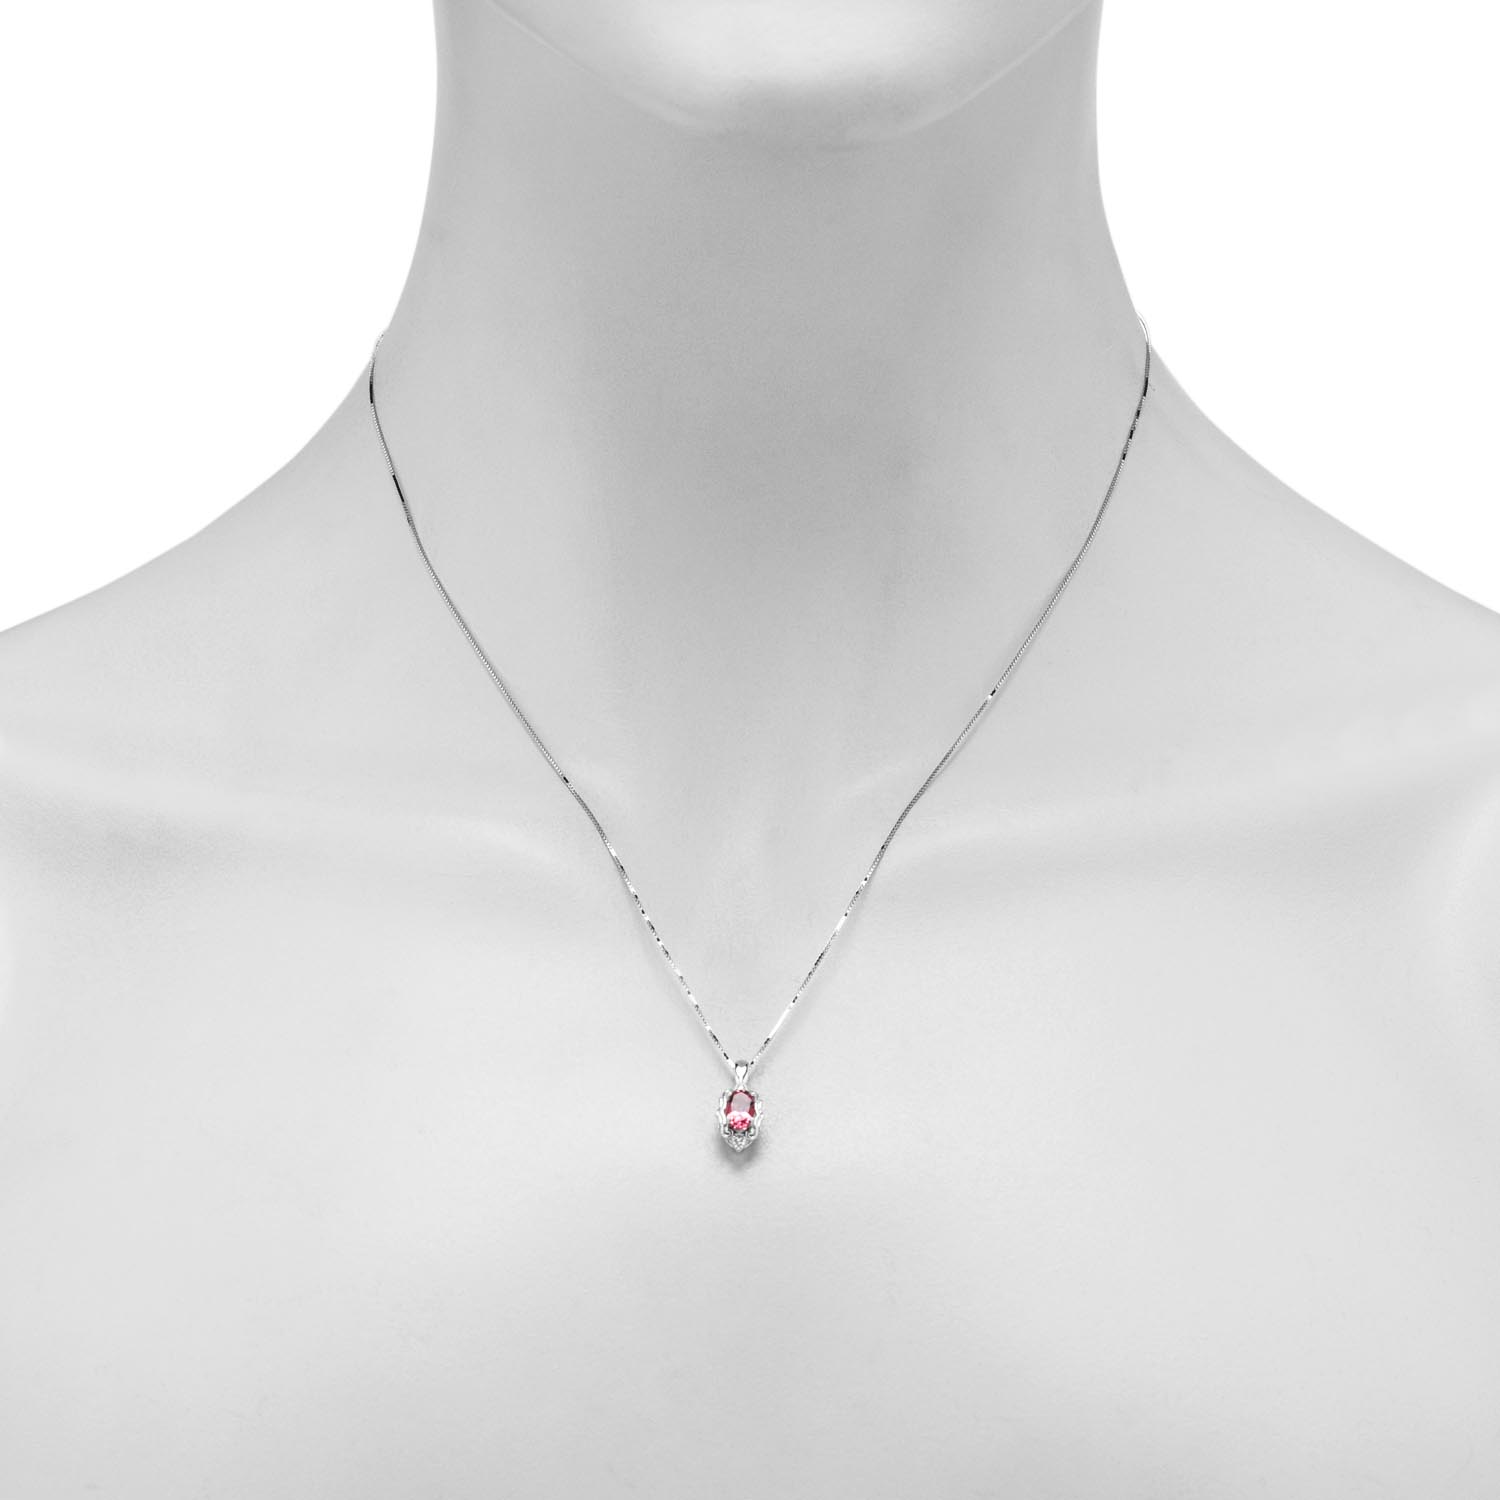 Maine Pink Tourmaline Oval Necklace in 14kt White Gold with Diamonds (.01ct tw)